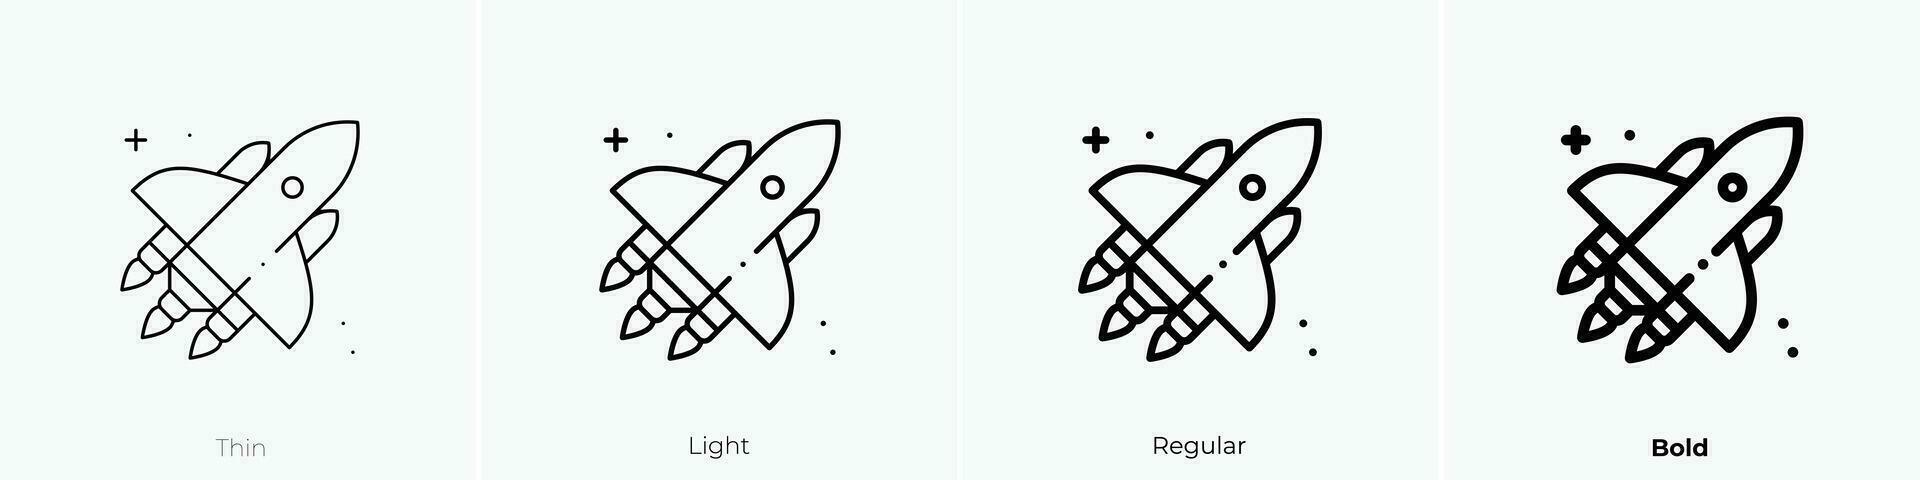 rocket icon. Thin, Light, Regular And Bold style design isolated on white background vector